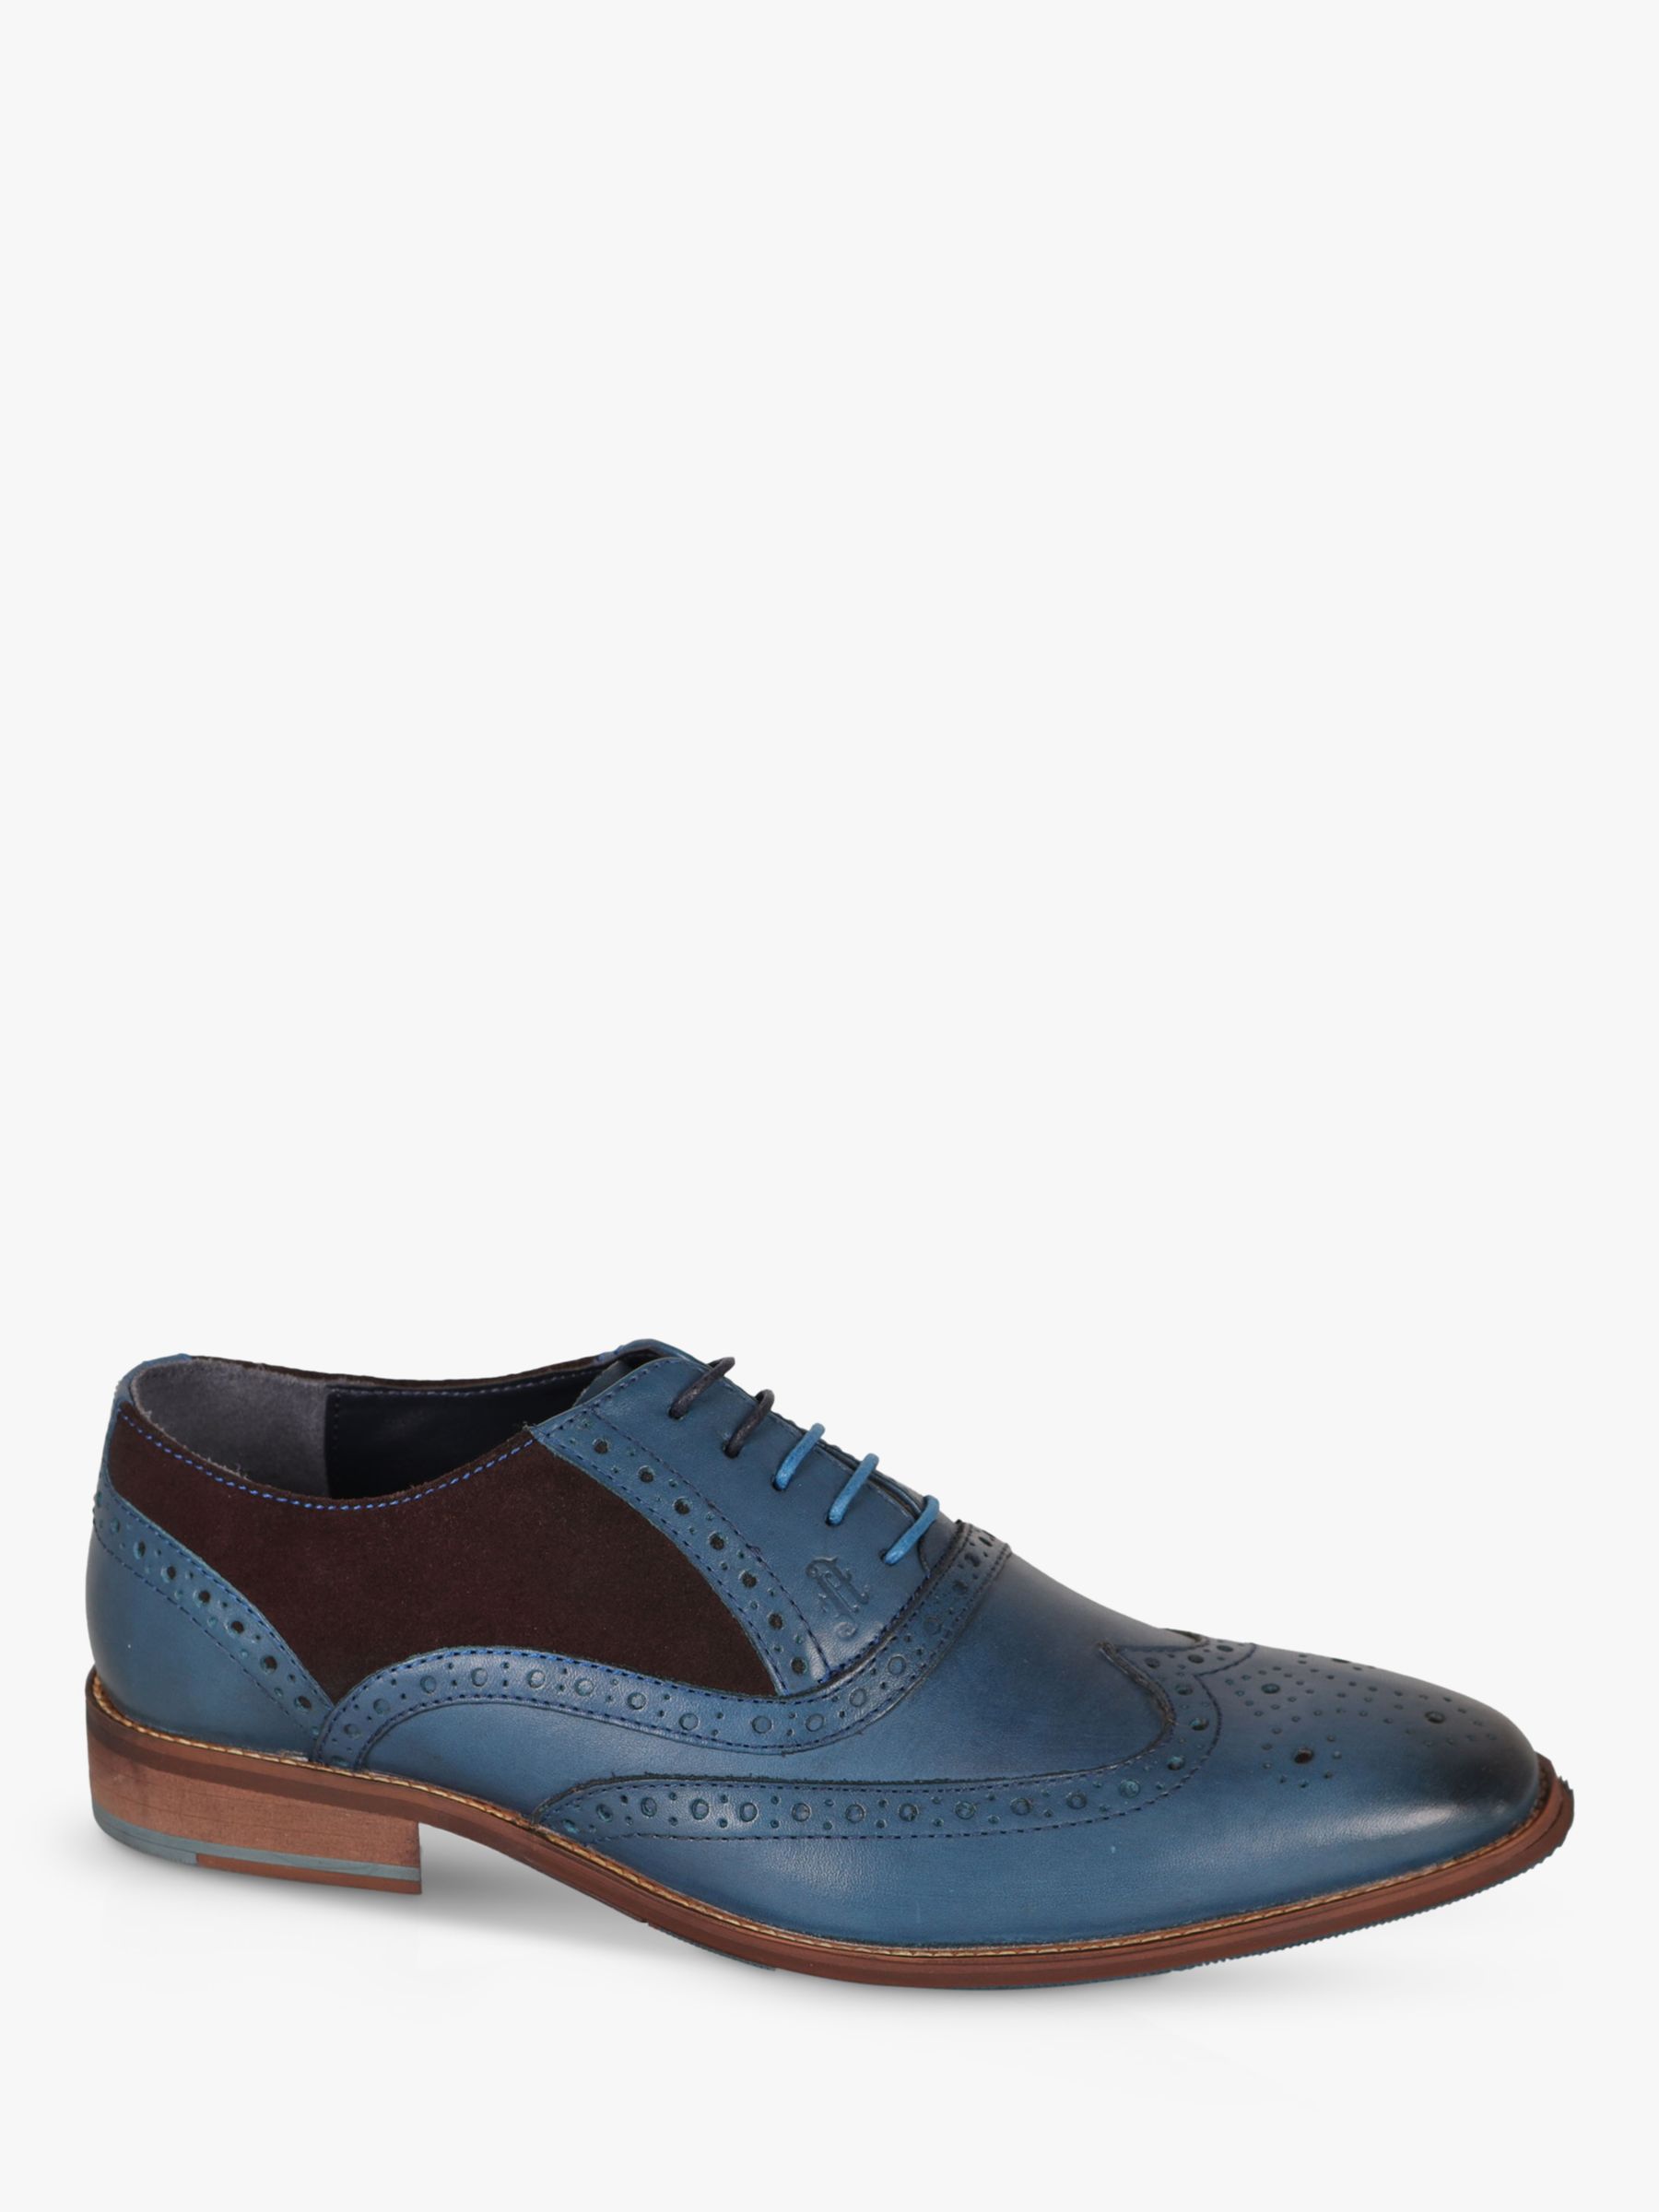 Silver Street London Amen Collection Waterford Leather Brogues, Blue ...